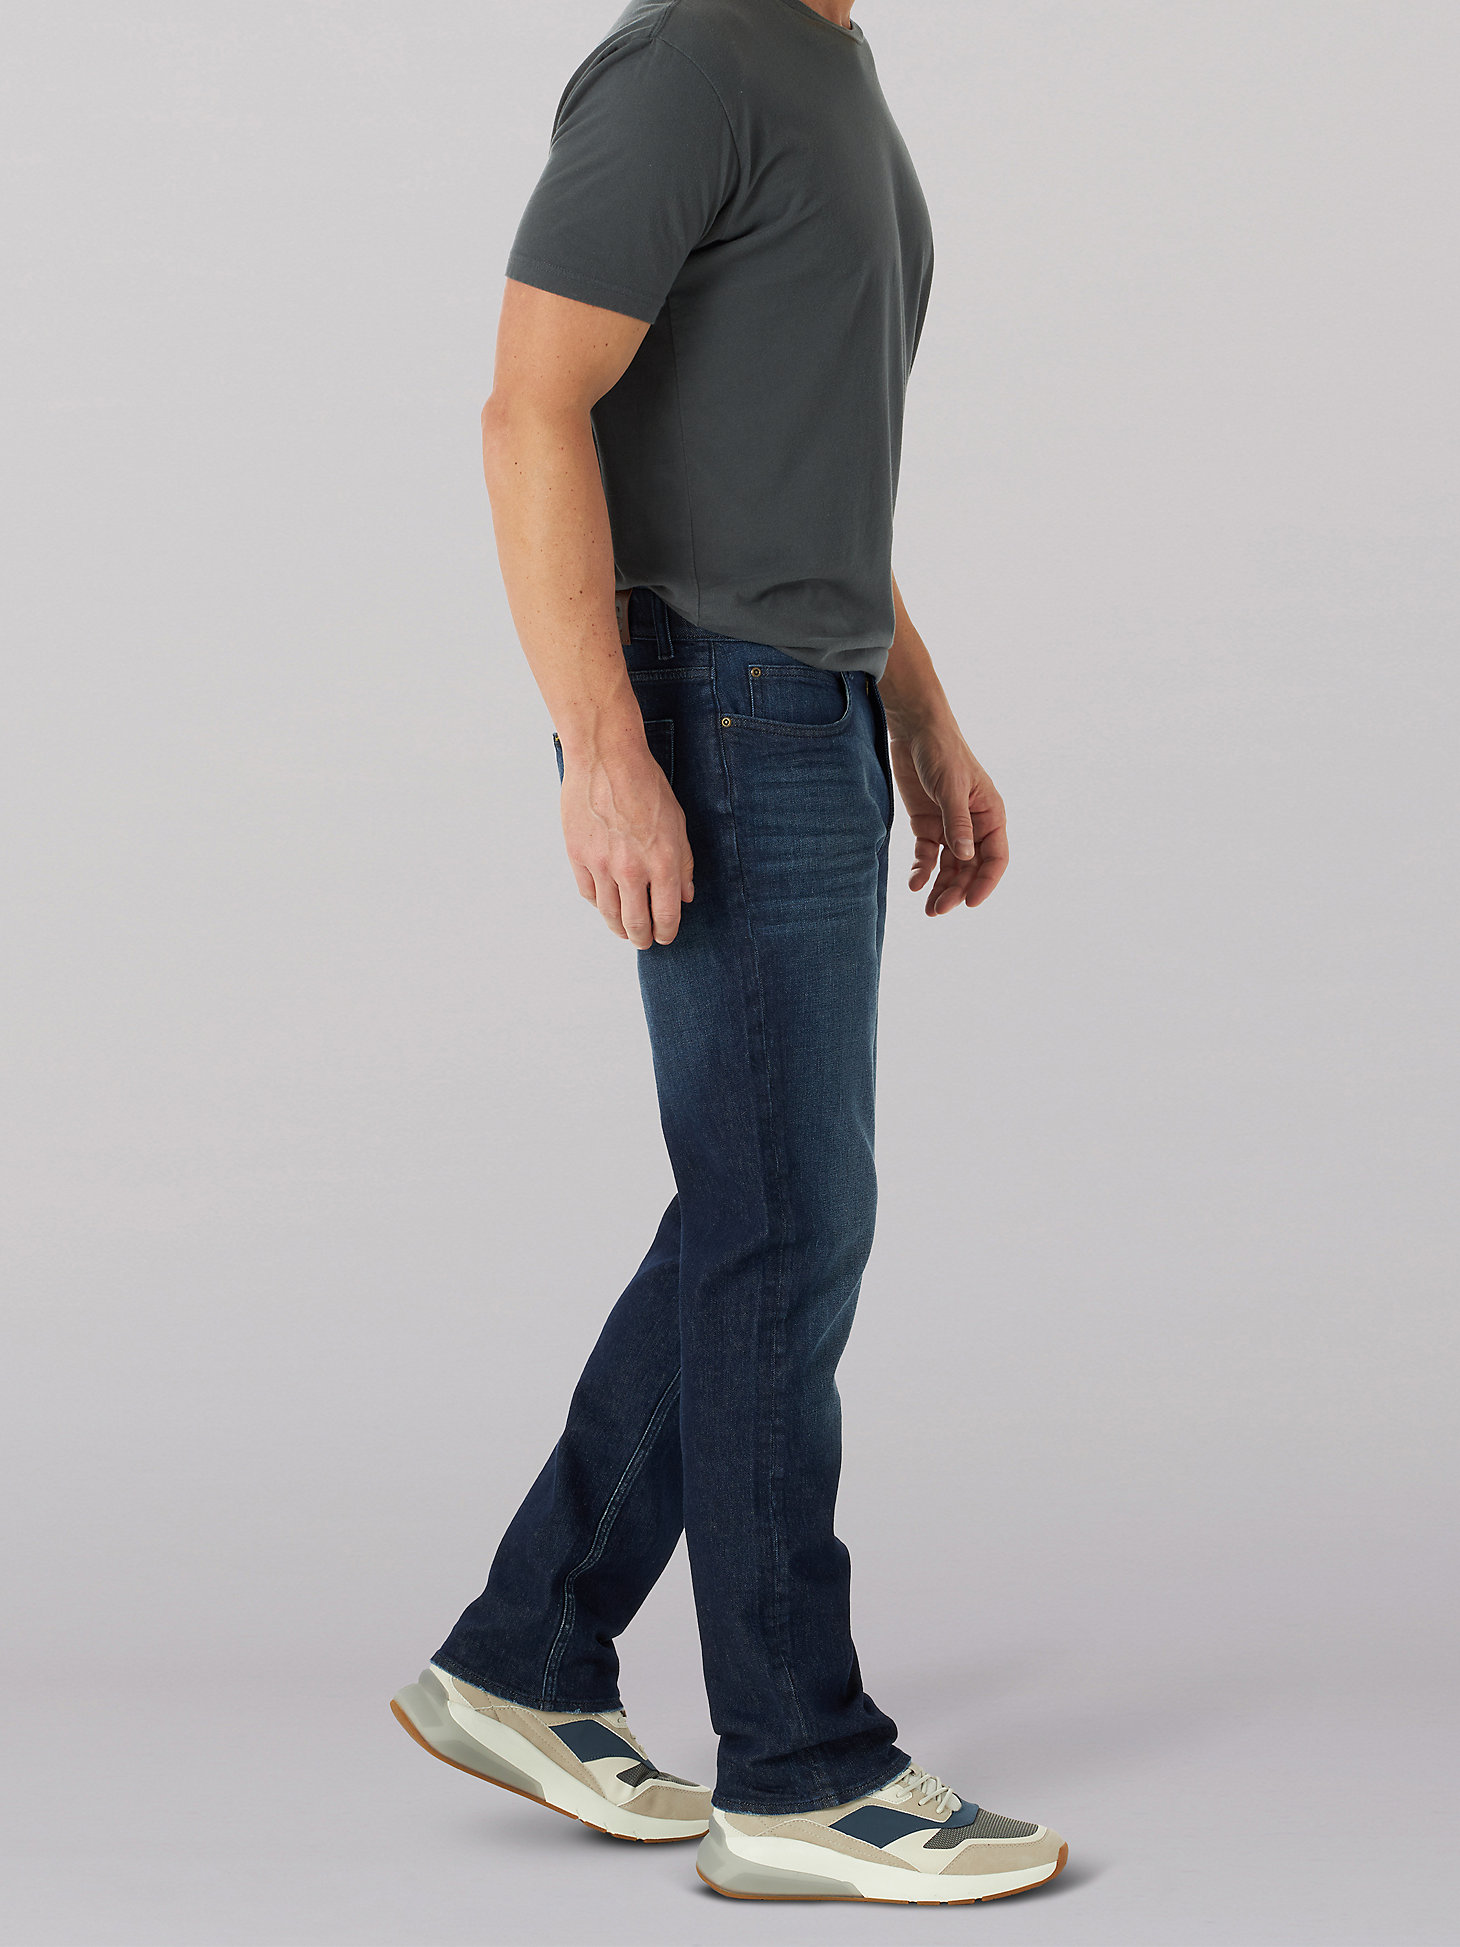 Men's Extreme Motion 4-Way Stretch Straight Tapered Jean in Counter Punch alternative view 2